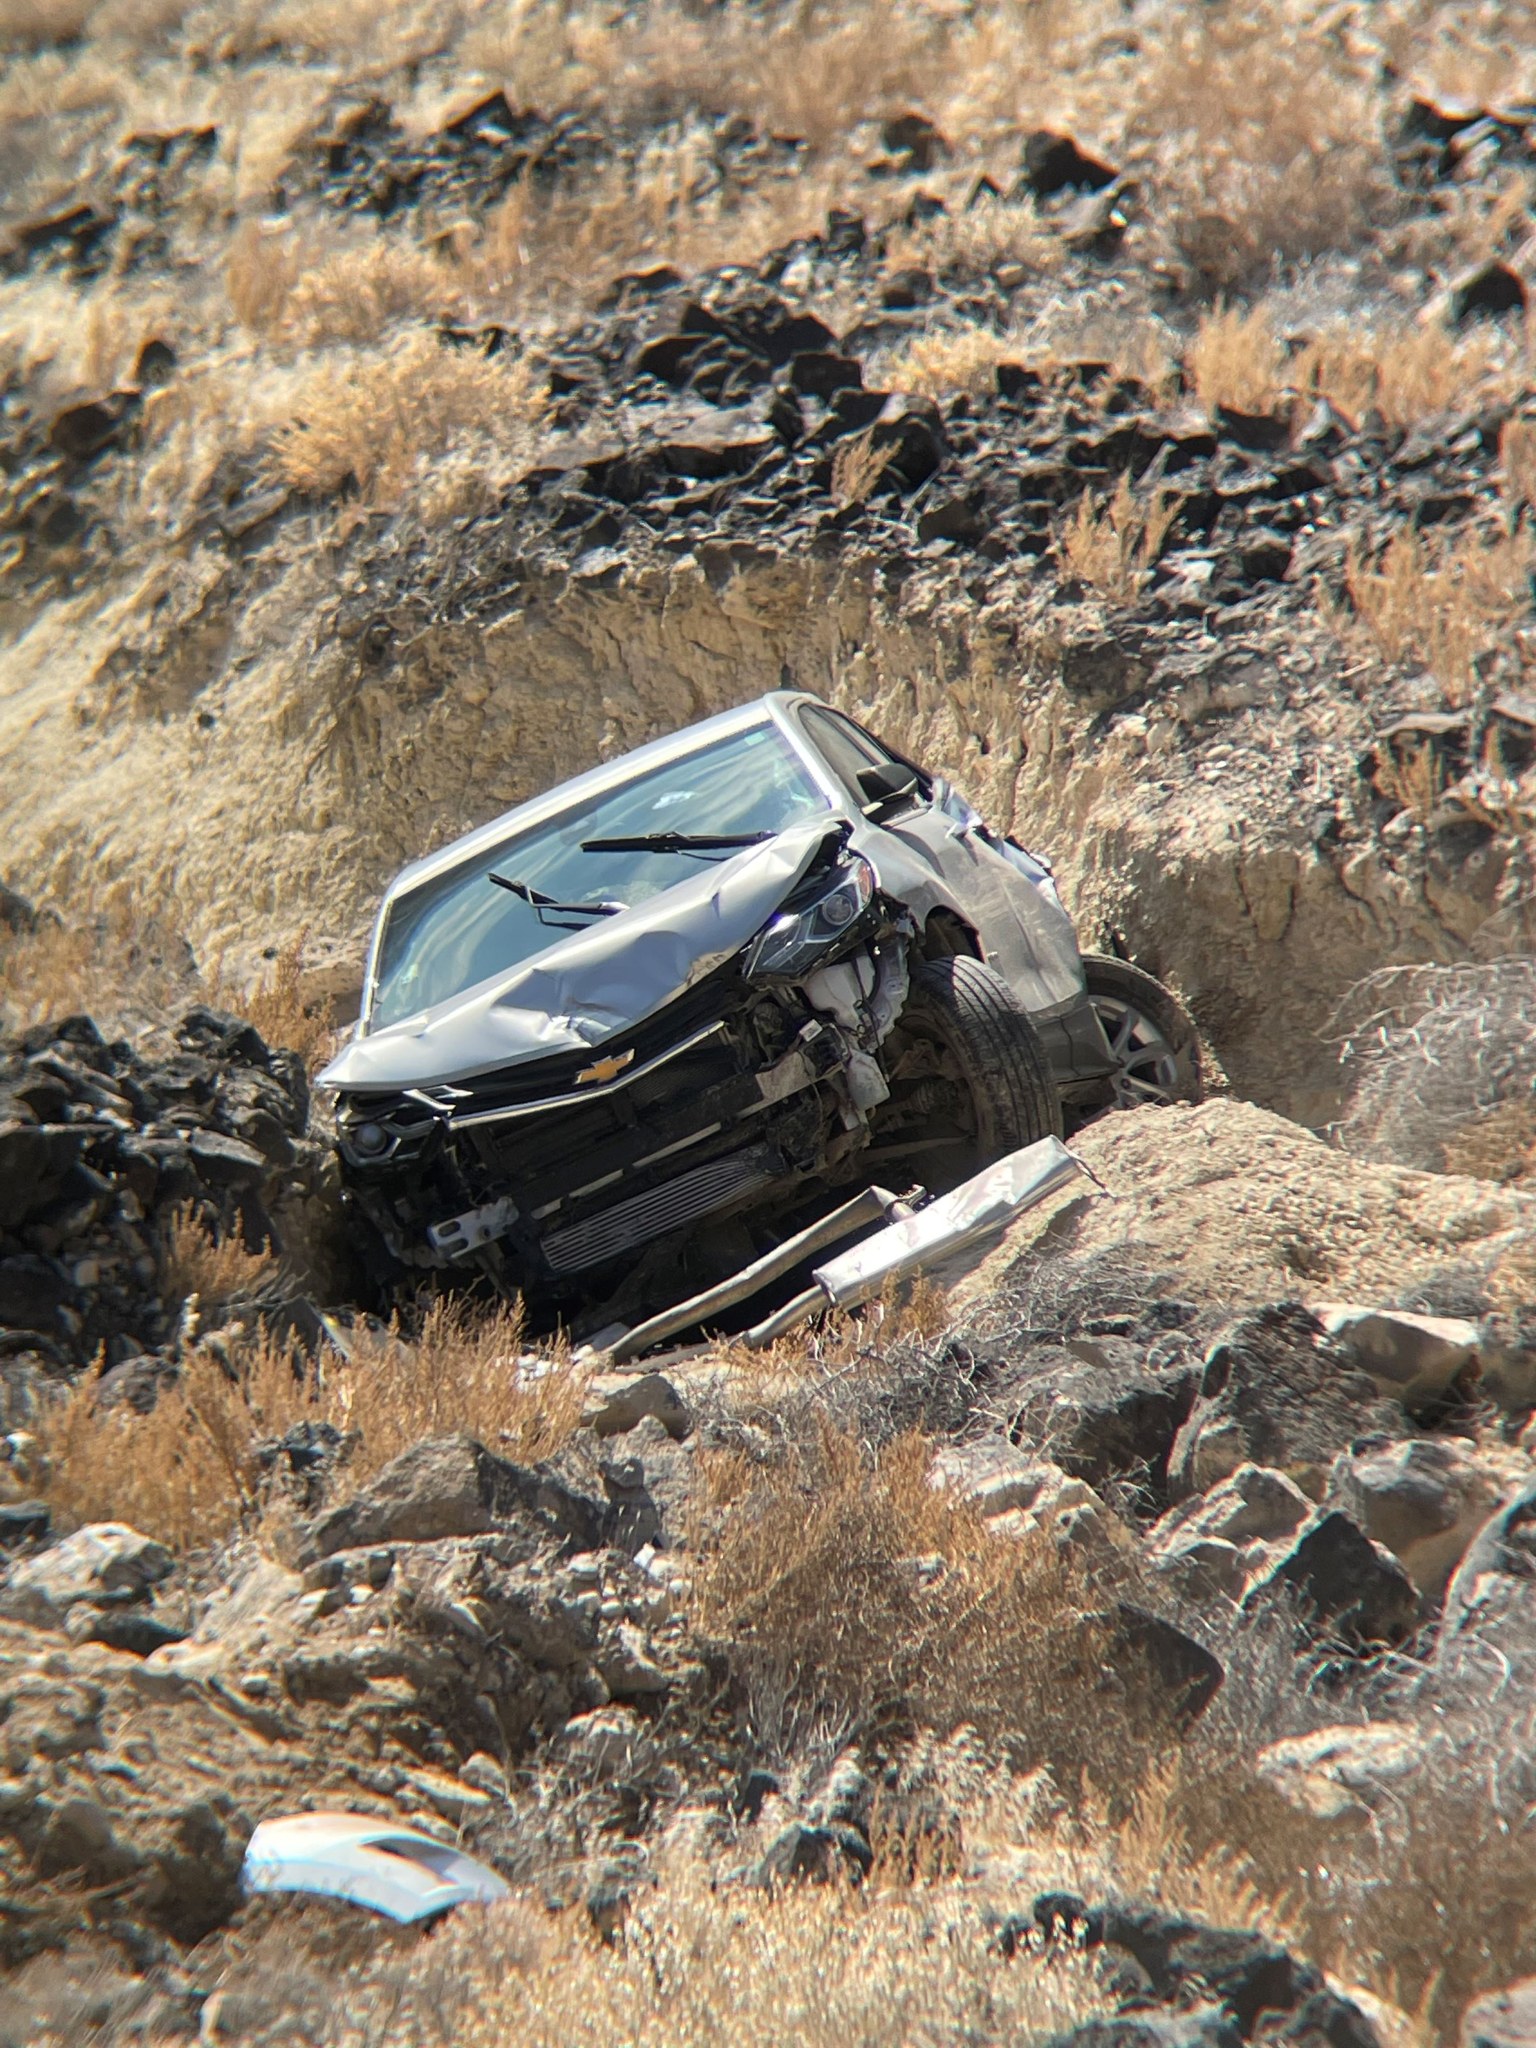 ‘Truly a Miracle’ | 72-Year-Old Woman Missing for 4 Days FOUND ALIVE After Car Falls Into Canyon